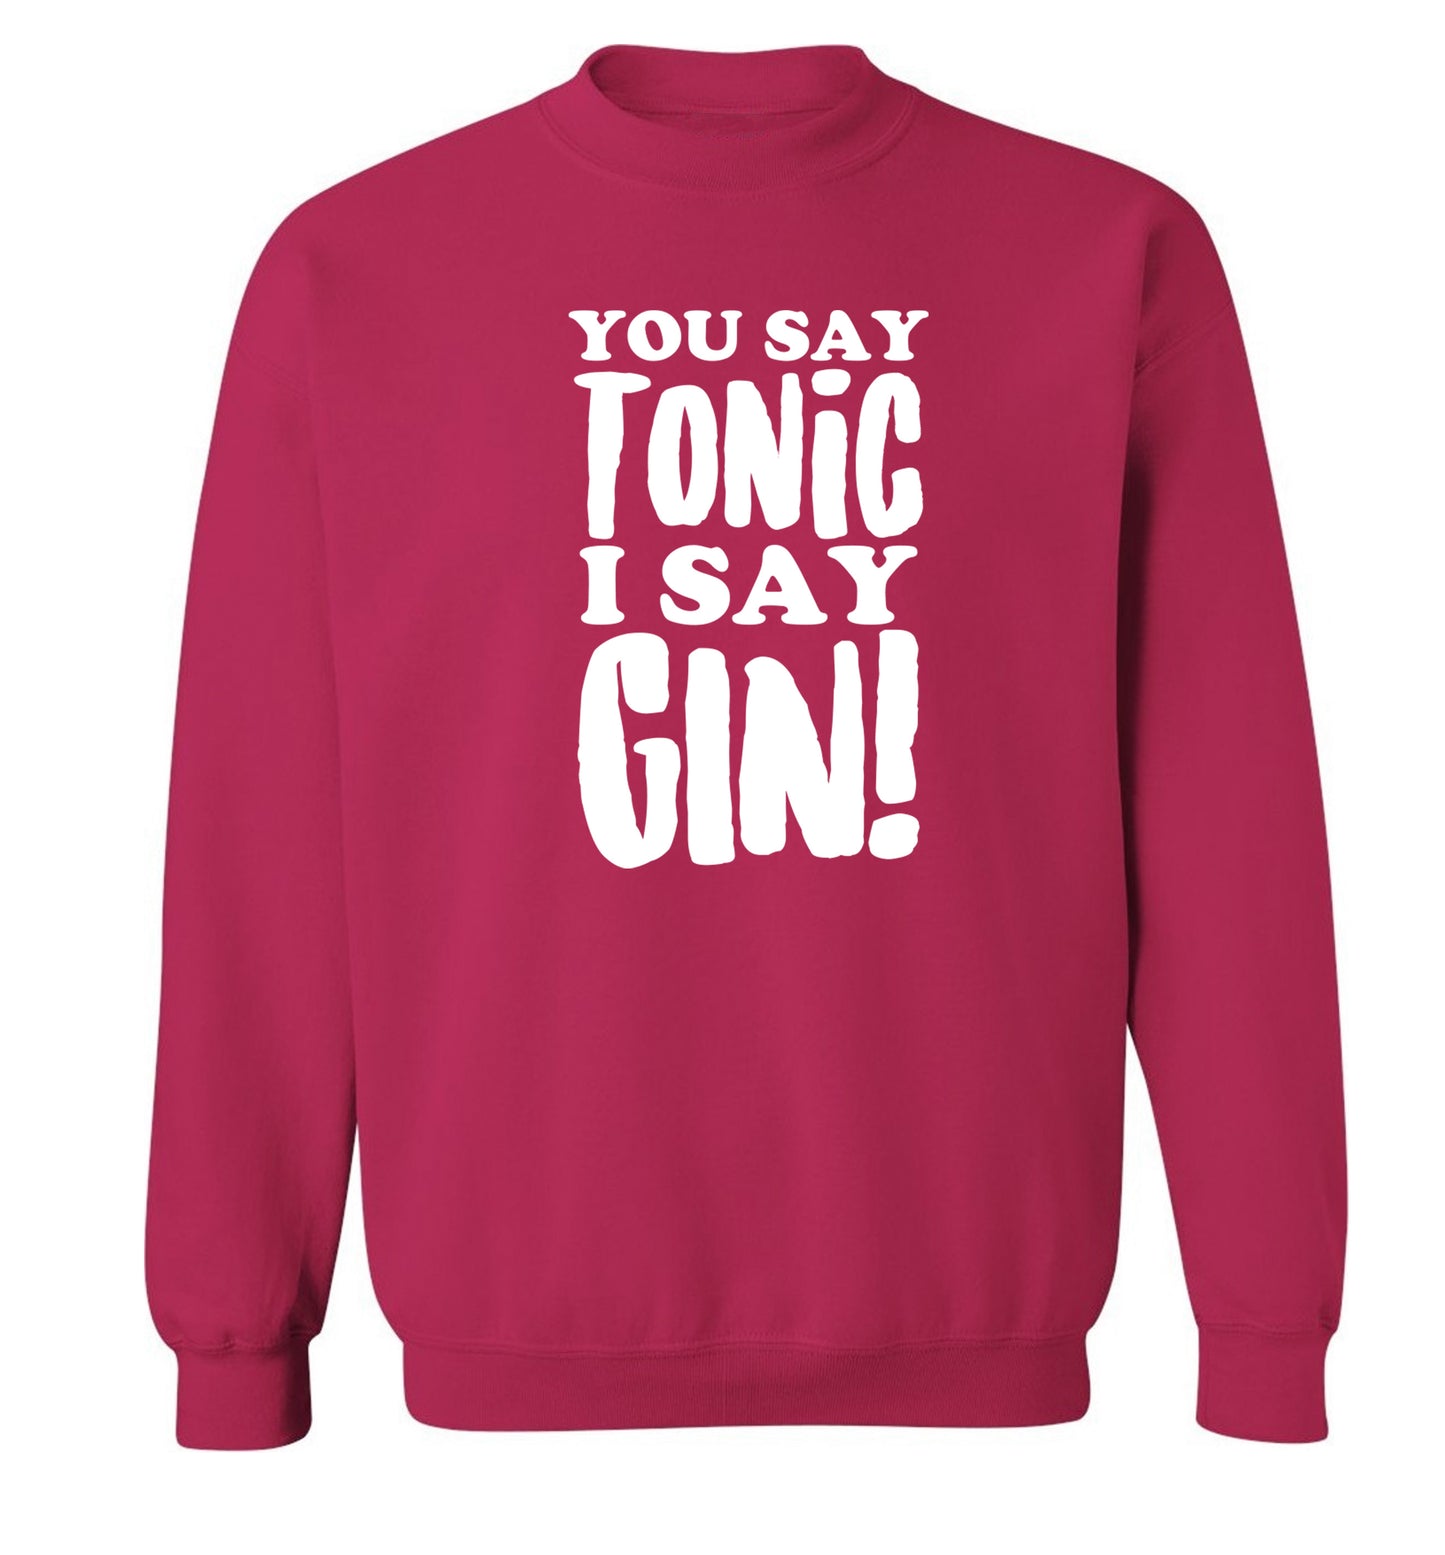 You say tonic I say gin! Adult's unisex pink Sweater 2XL